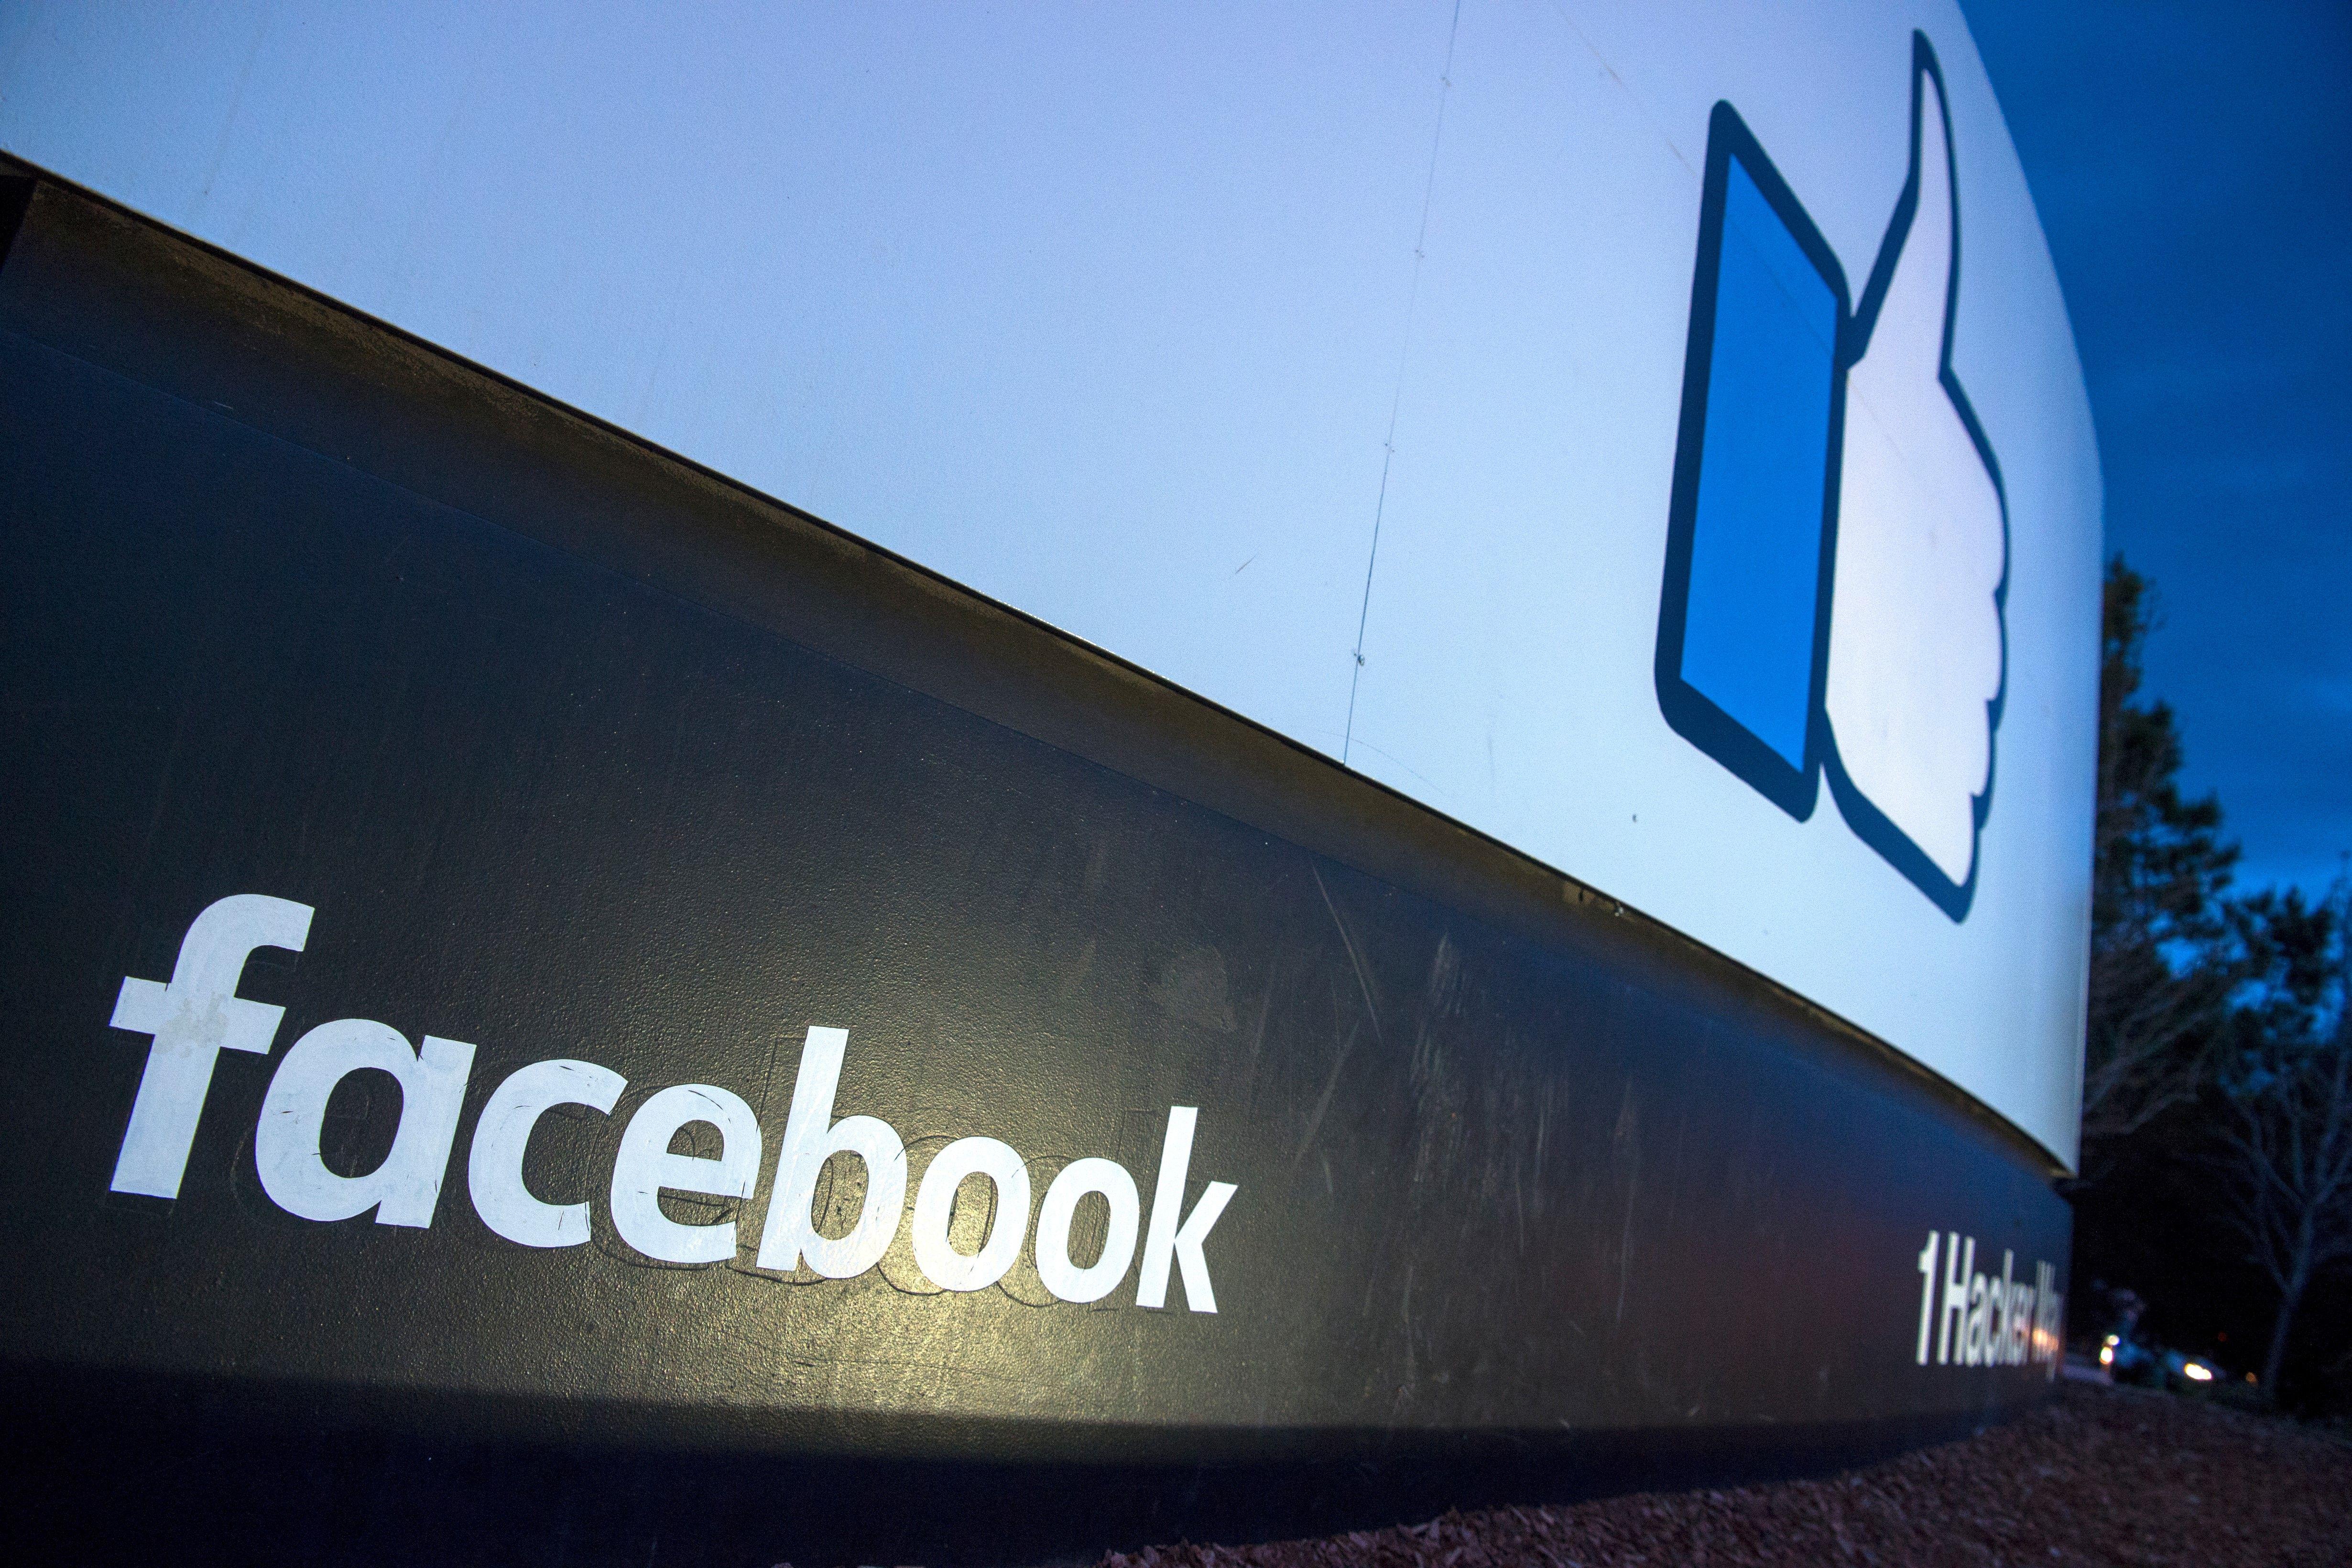 A lit sign is seen at the entrance to Facebook's corporate headquarters location in Menlo Park, California.